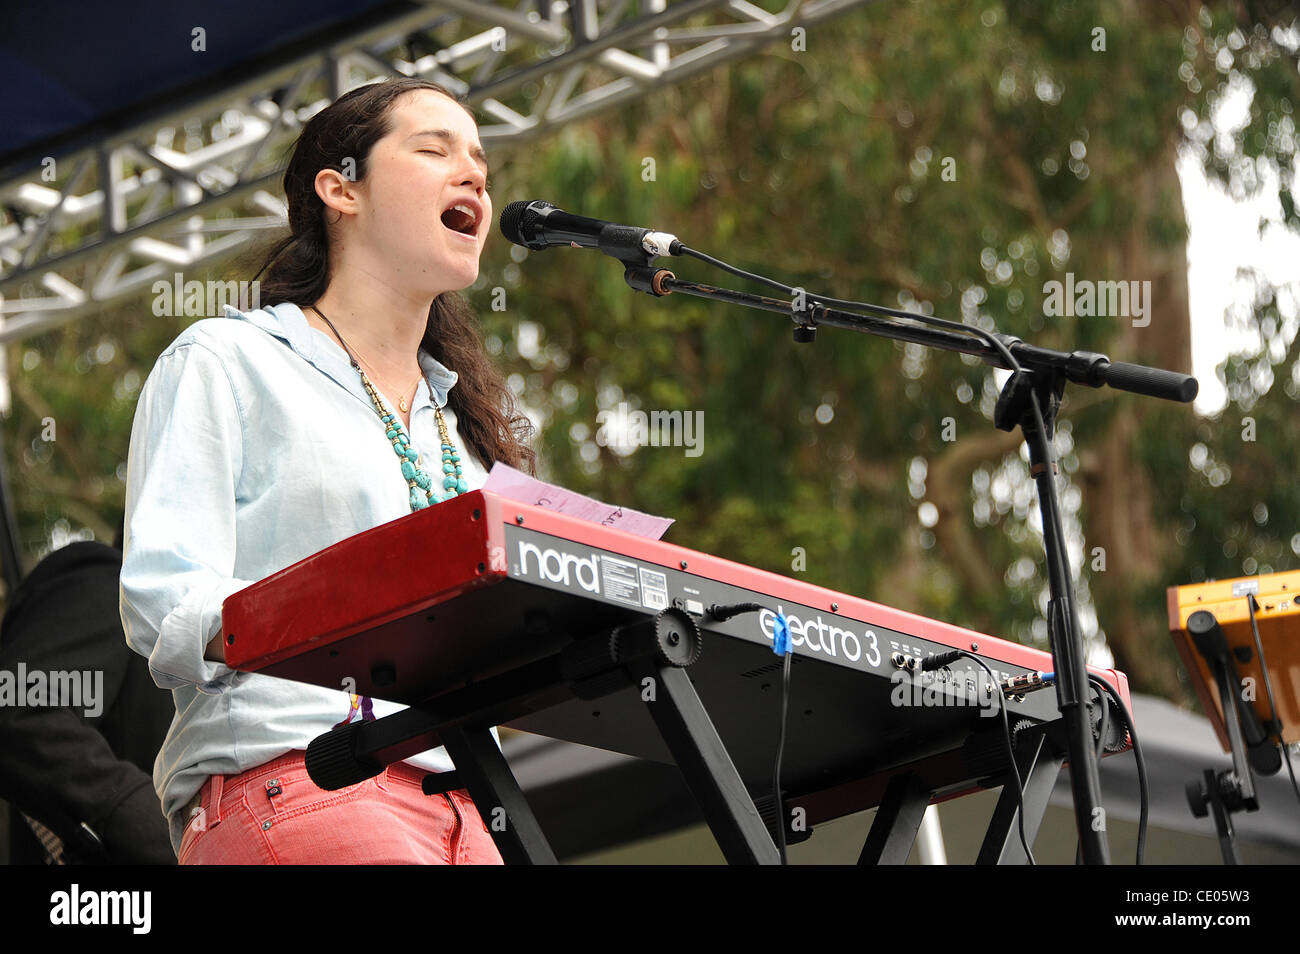 Aug 13, 2011 - San Francisco, California; USA - Musician XIMENA SARINANA performs live as part of the 2011 Outside Lands Music Festival that is taking place at Golden Gate Park.  The three day festival will attract thousands of fans to see a variety of artist on six different stages. Copyright 2011  Stock Photo